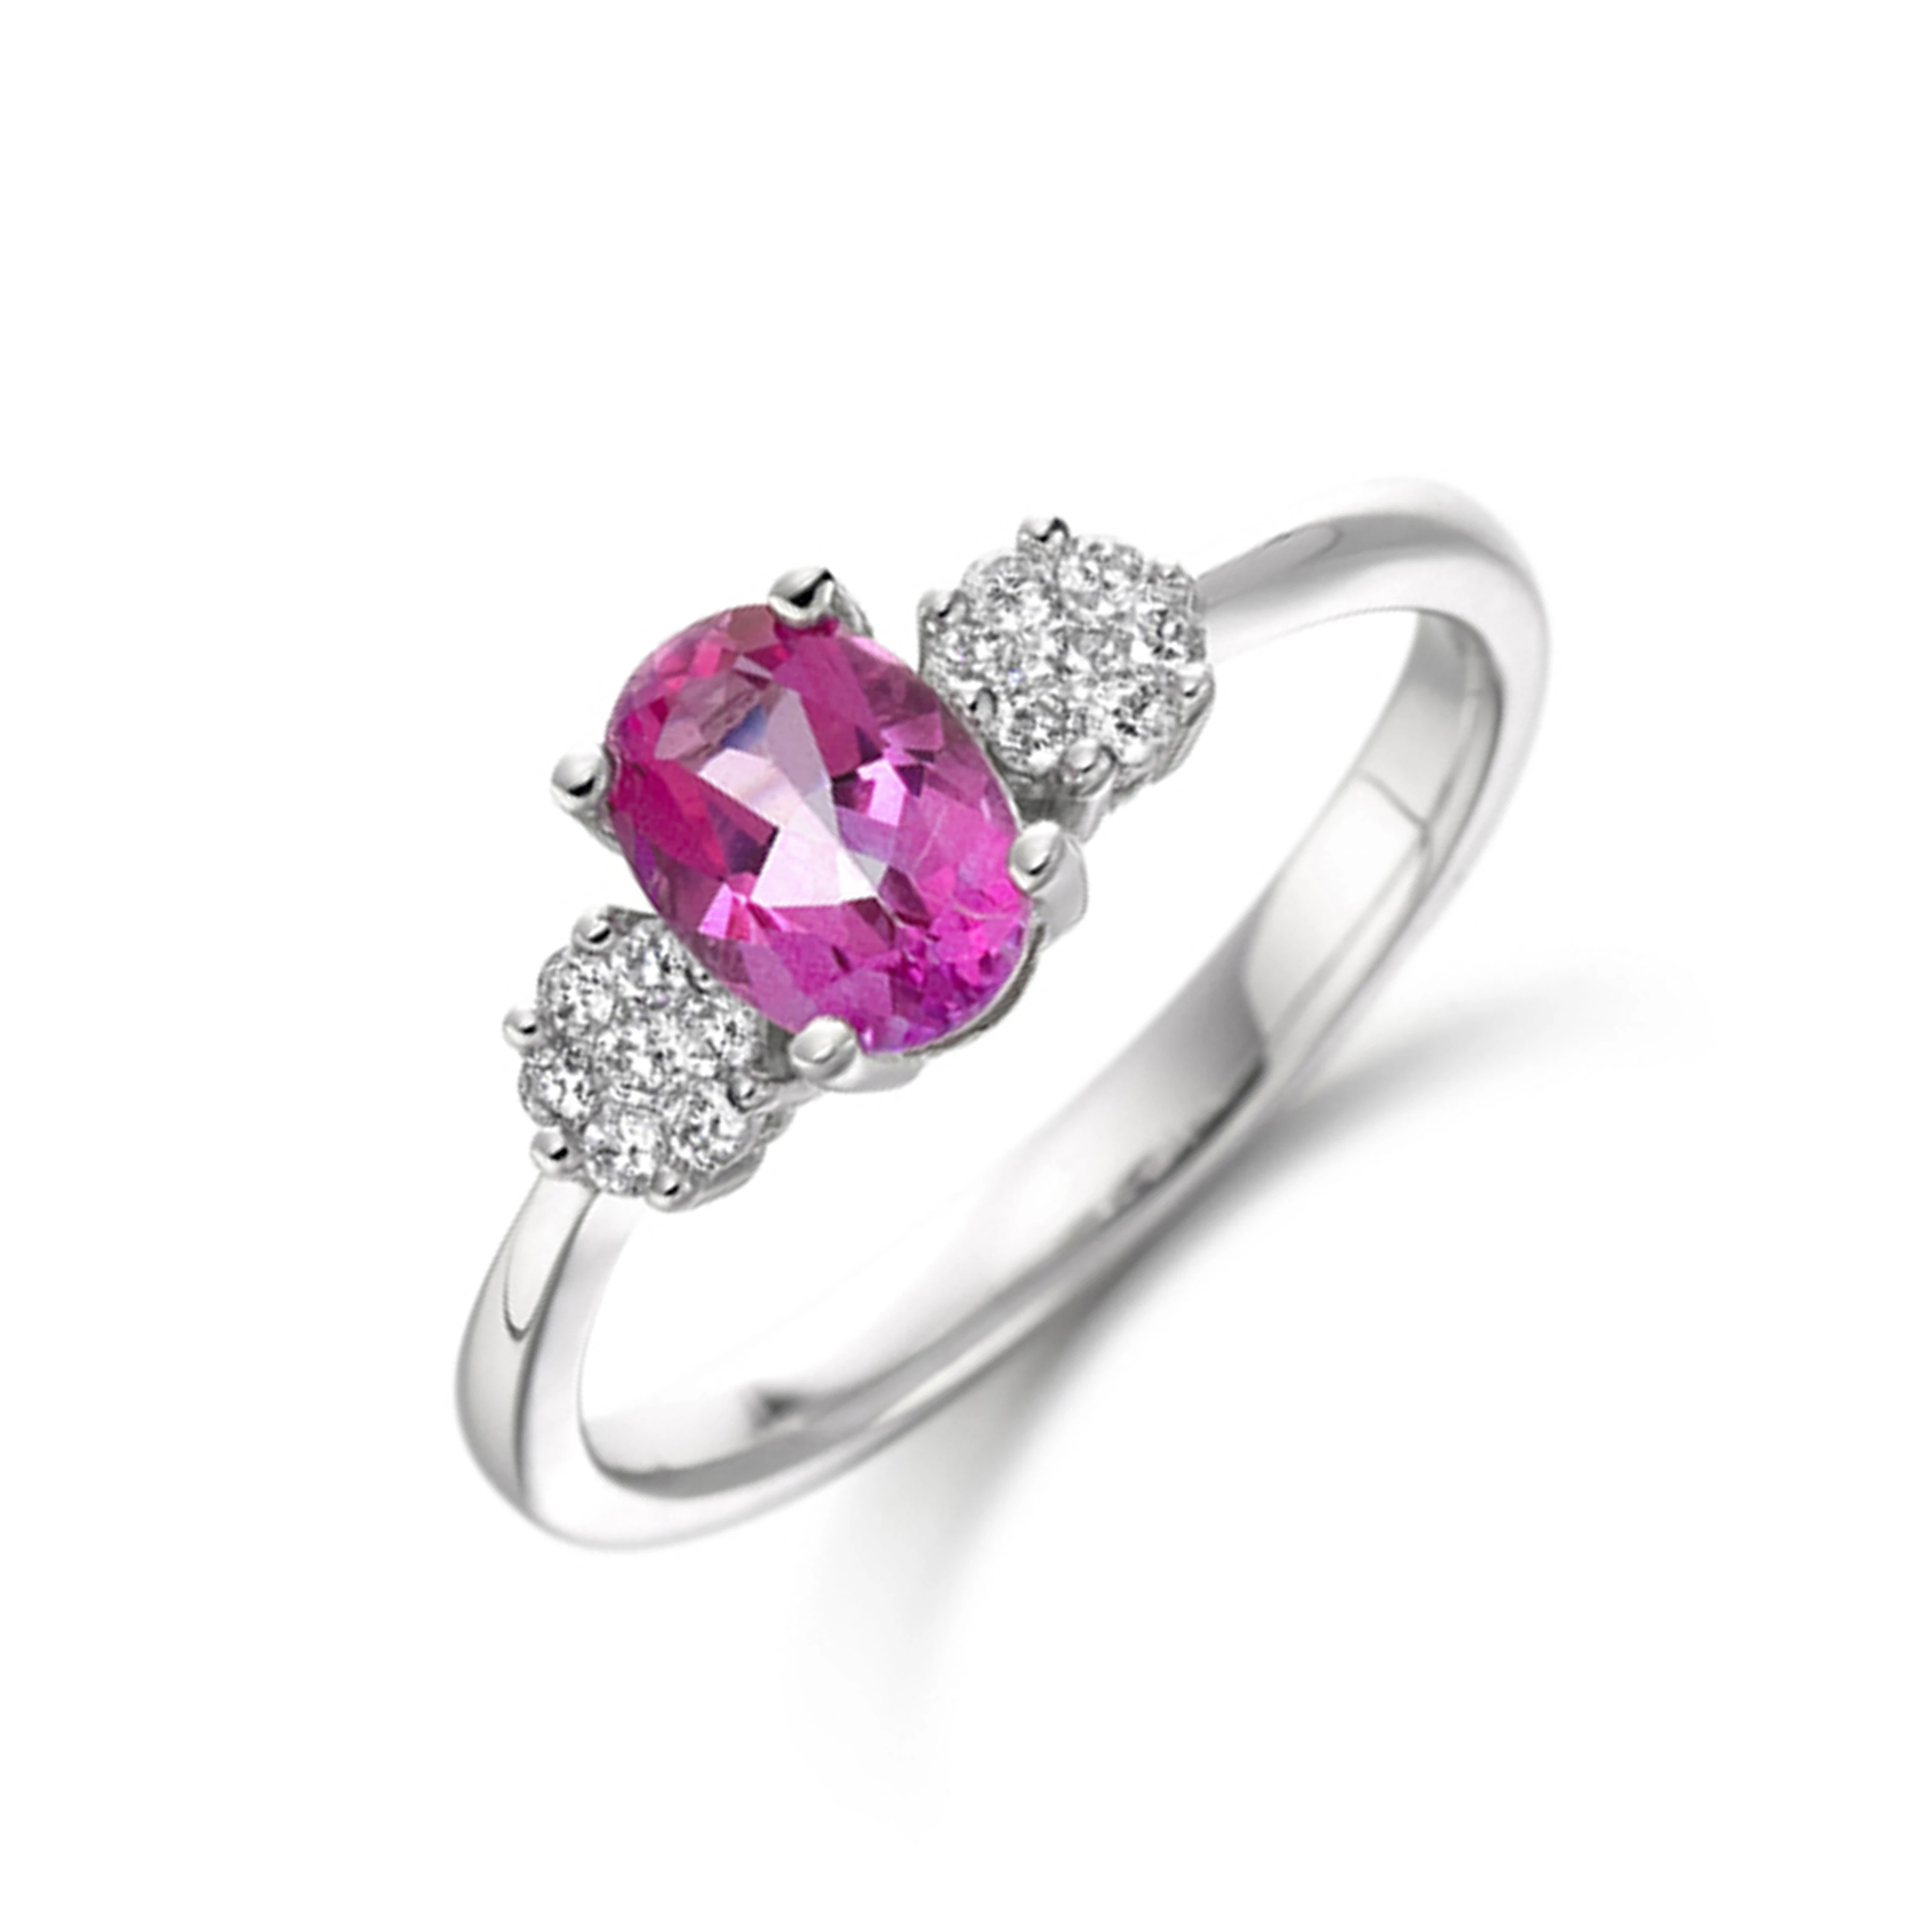 7X5mm Oval Pink Topaz Stones On Shoulder Diamond And Gemstone Engagement Ring